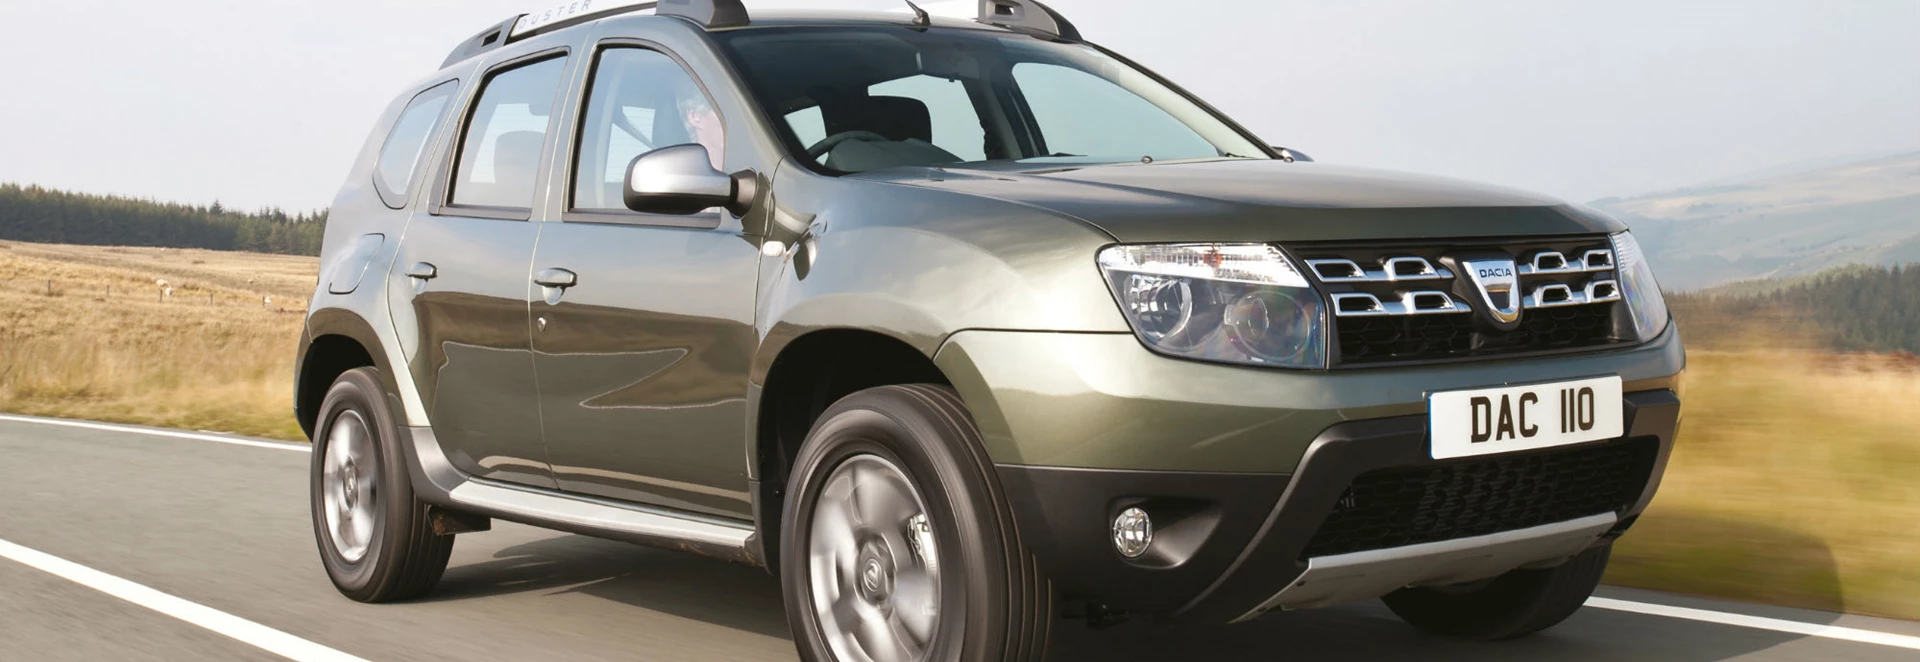 Dacia Duster crossover review 